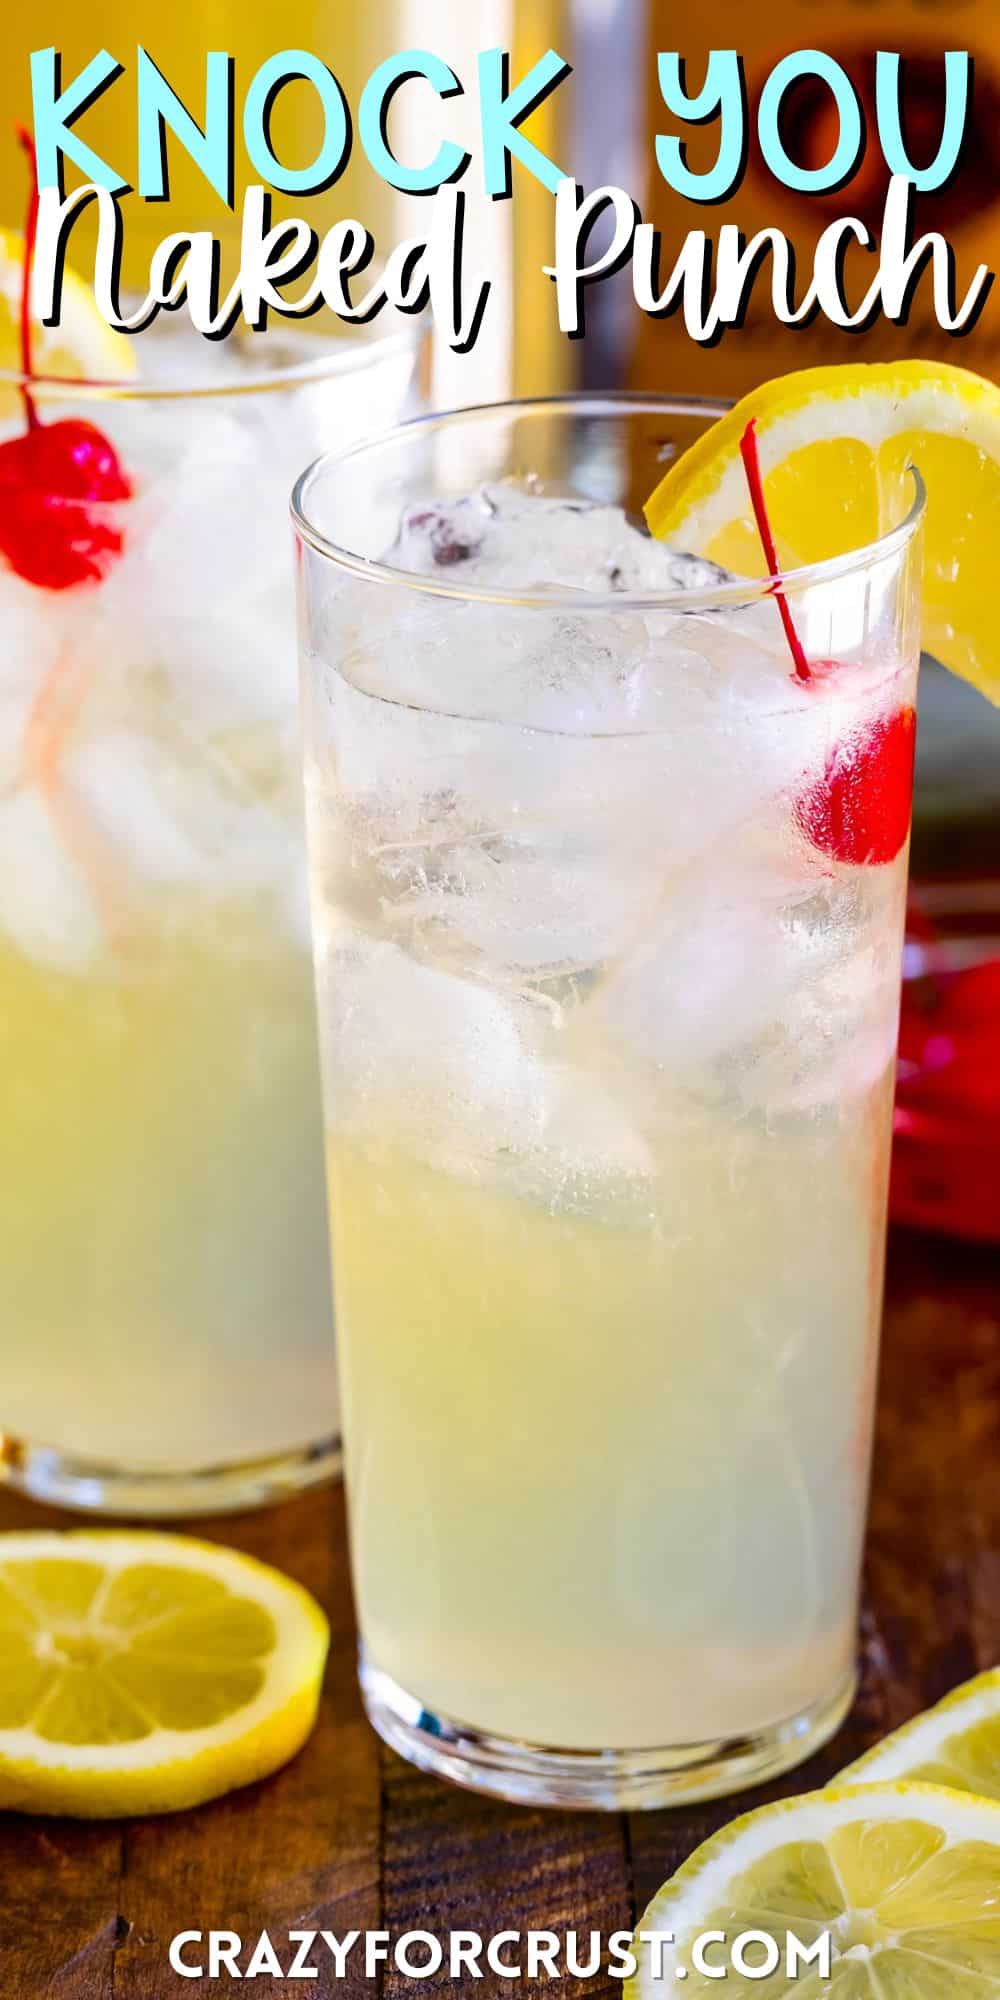 yellow party punch in a tall clear class with a cherry and lemon slice on the rim with words on the image.